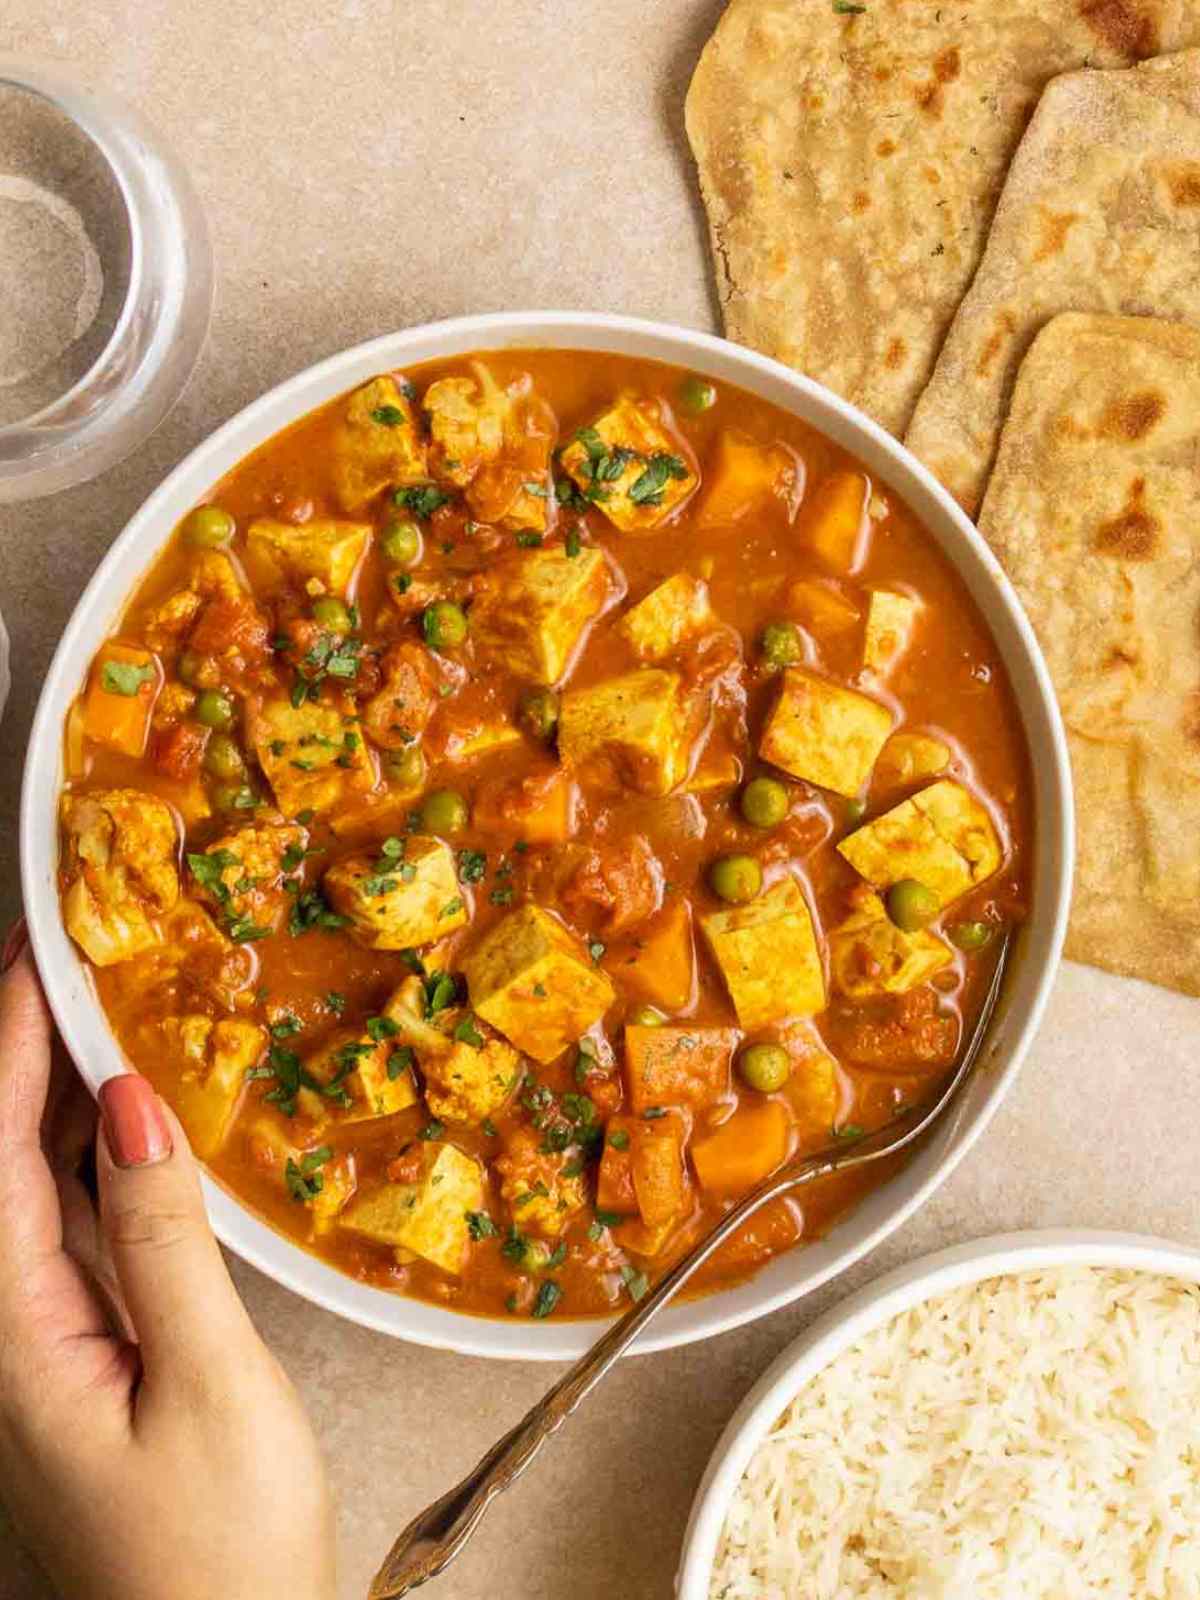 A hand is holding a bowl filled with tofu madras curry.